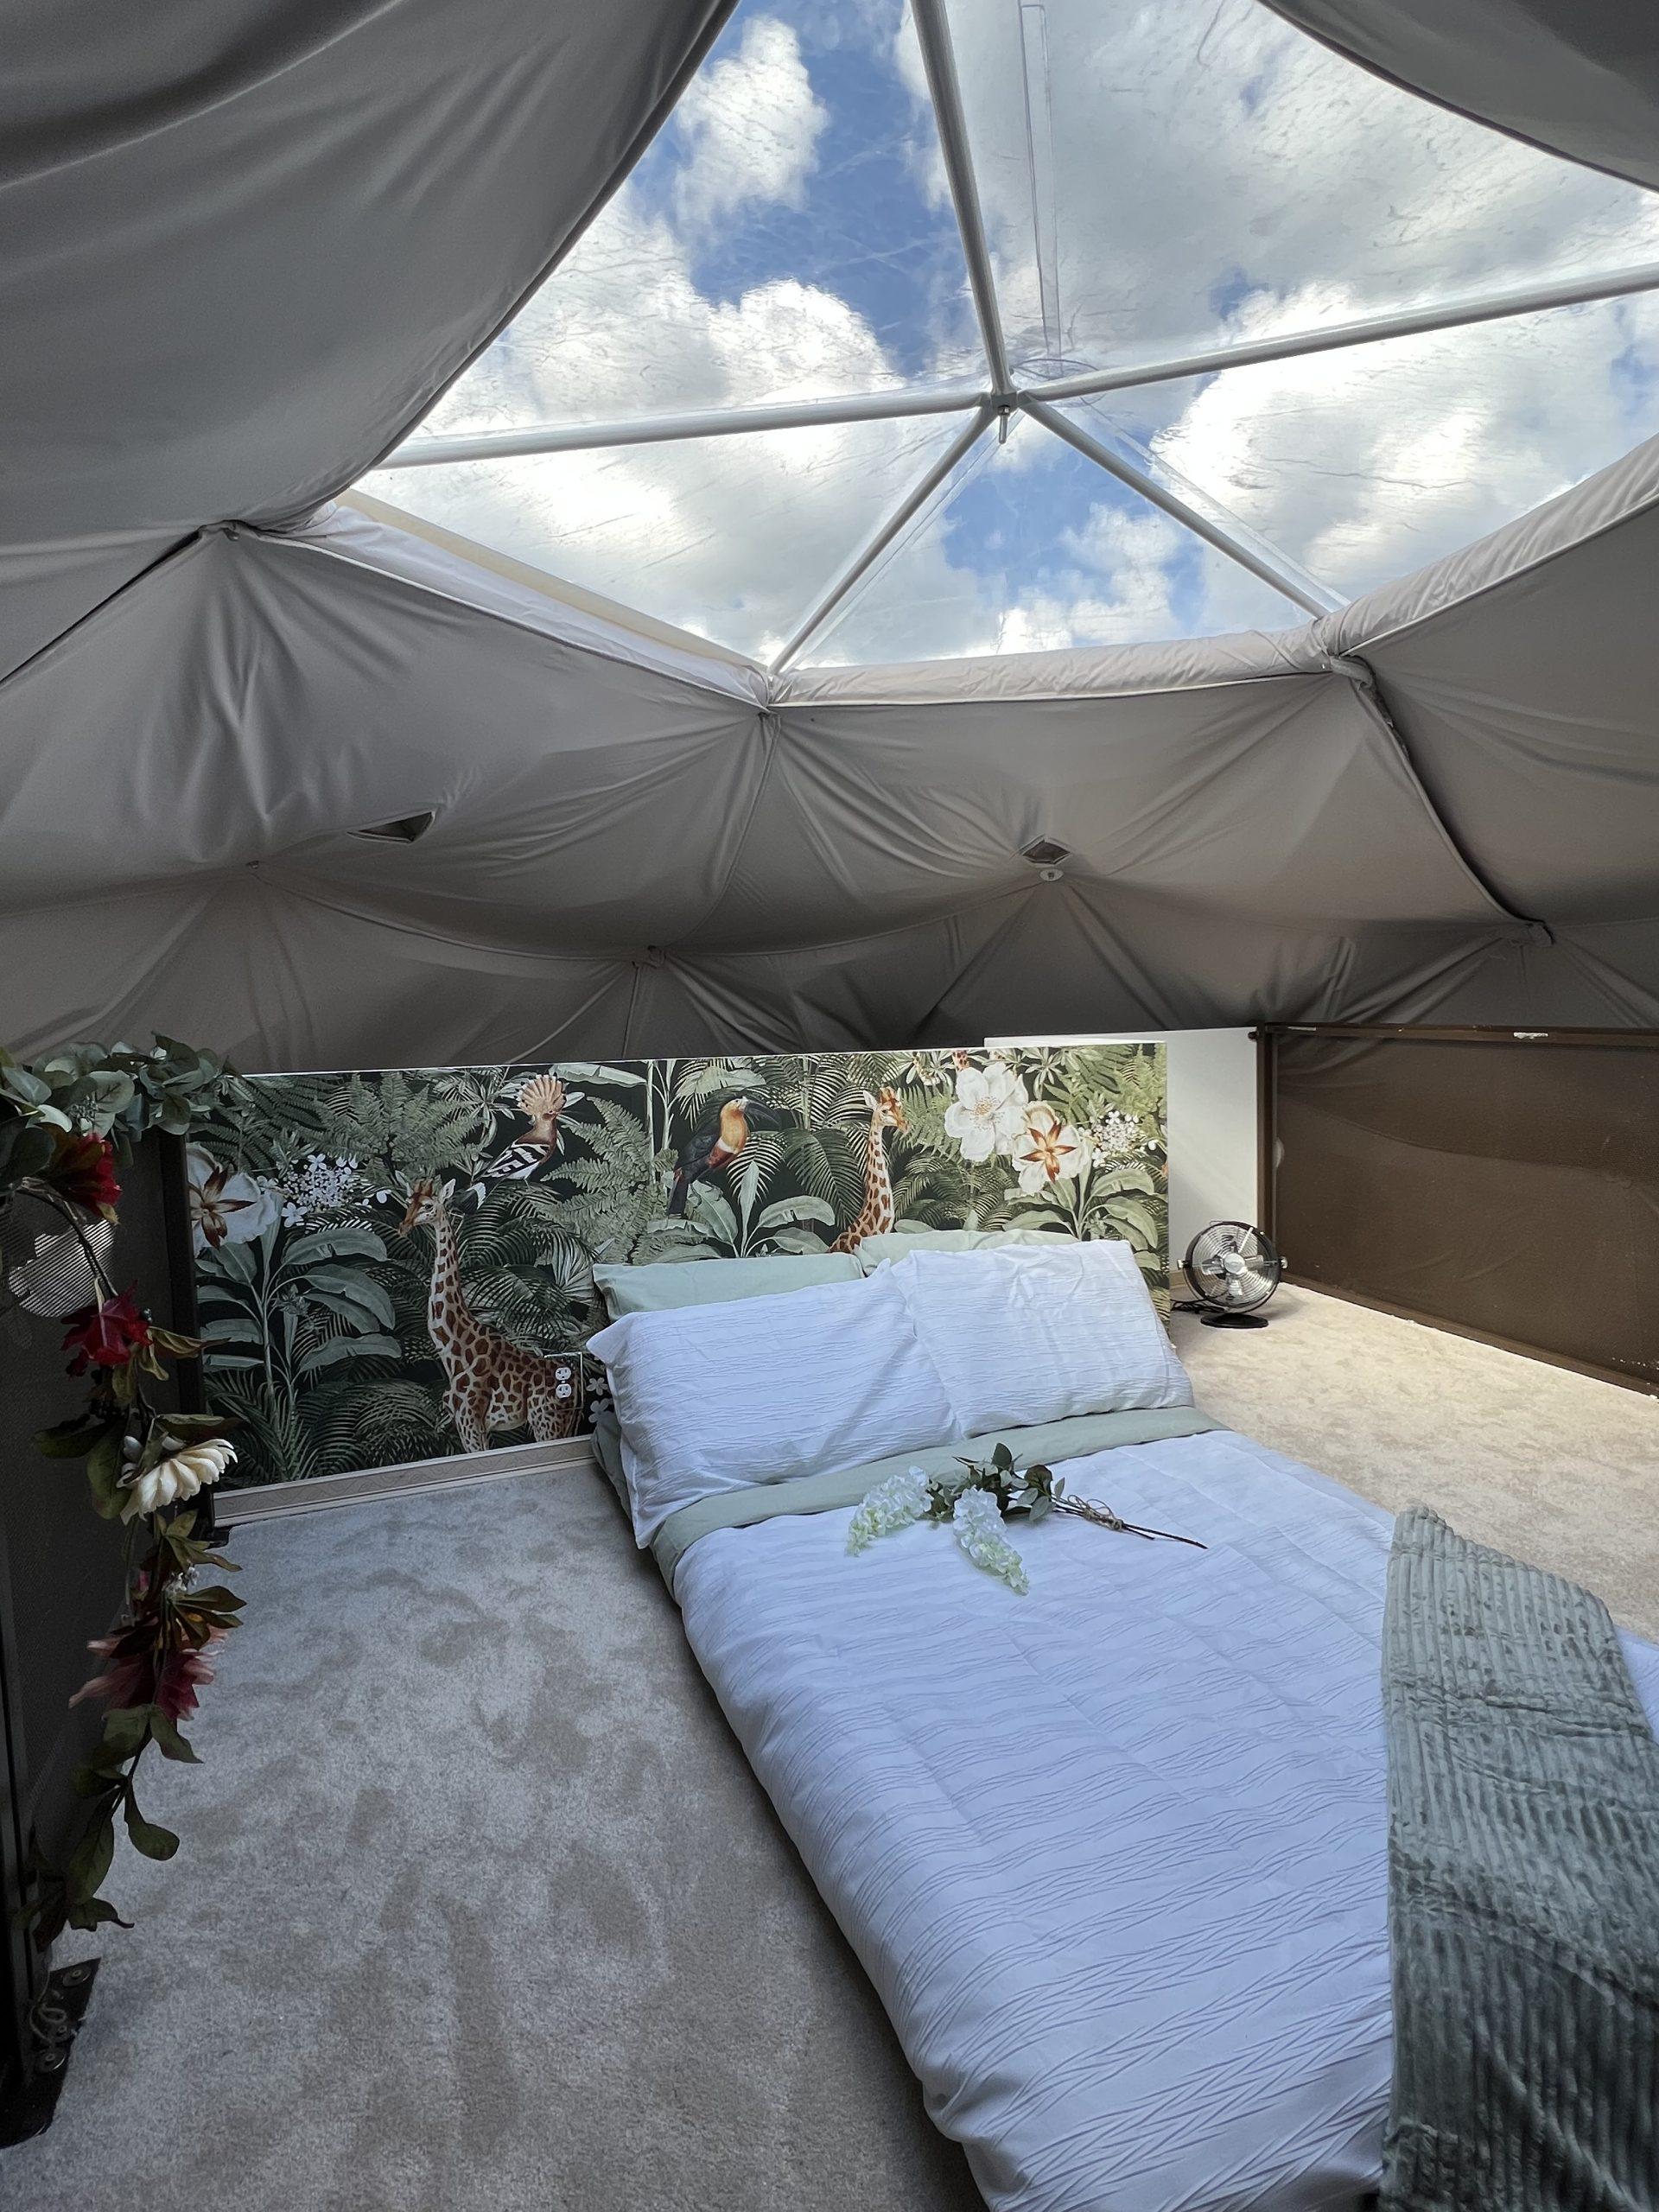 interior of geodesic dome with view at loft bed, insulation and the skylight